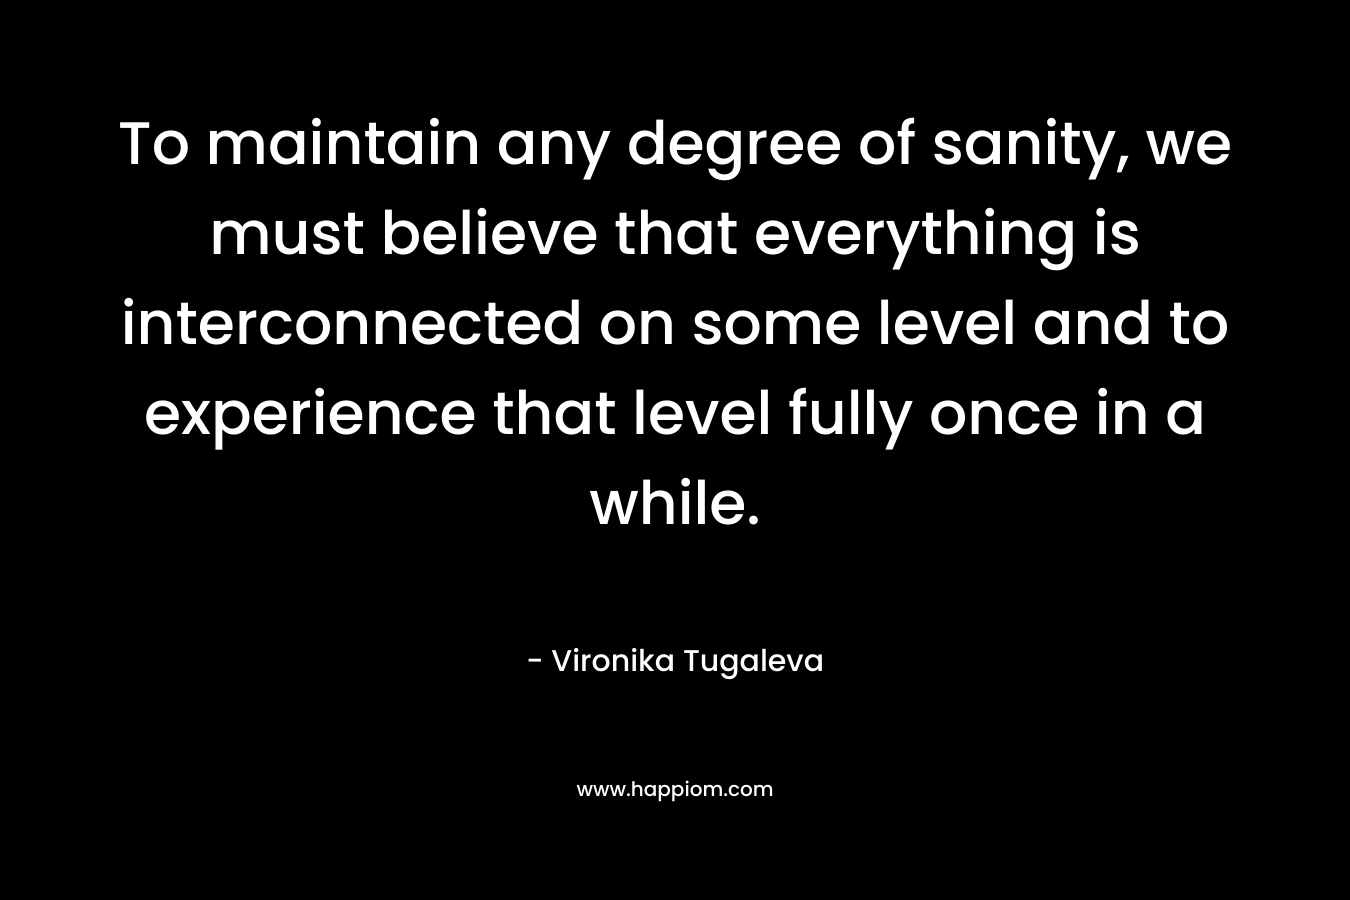 To maintain any degree of sanity, we must believe that everything is interconnected on some level and to experience that level fully once in a while. – Vironika Tugaleva